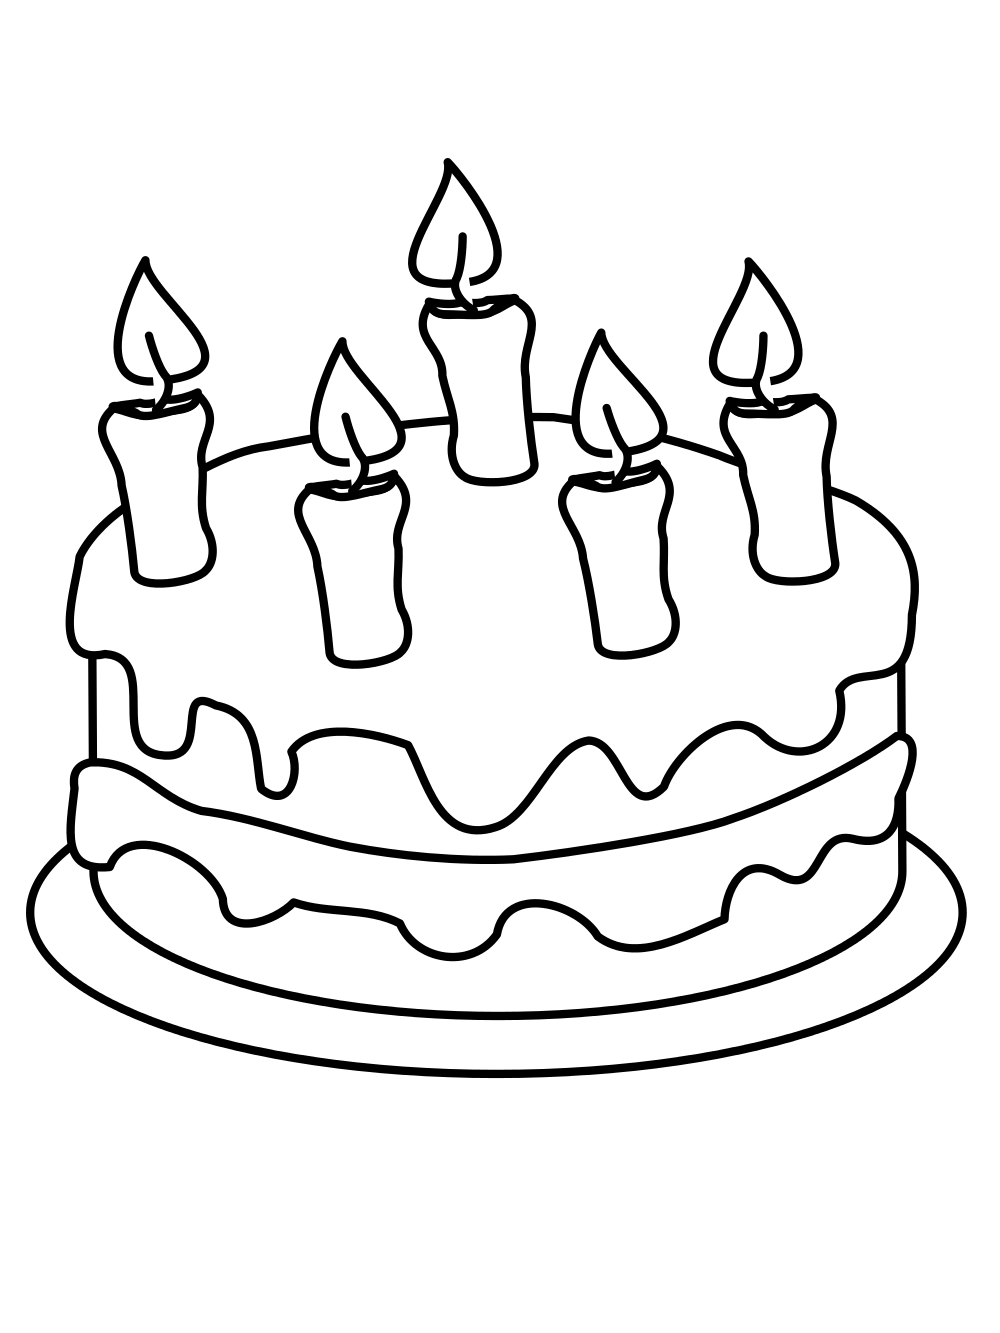 clipart birthday drawing